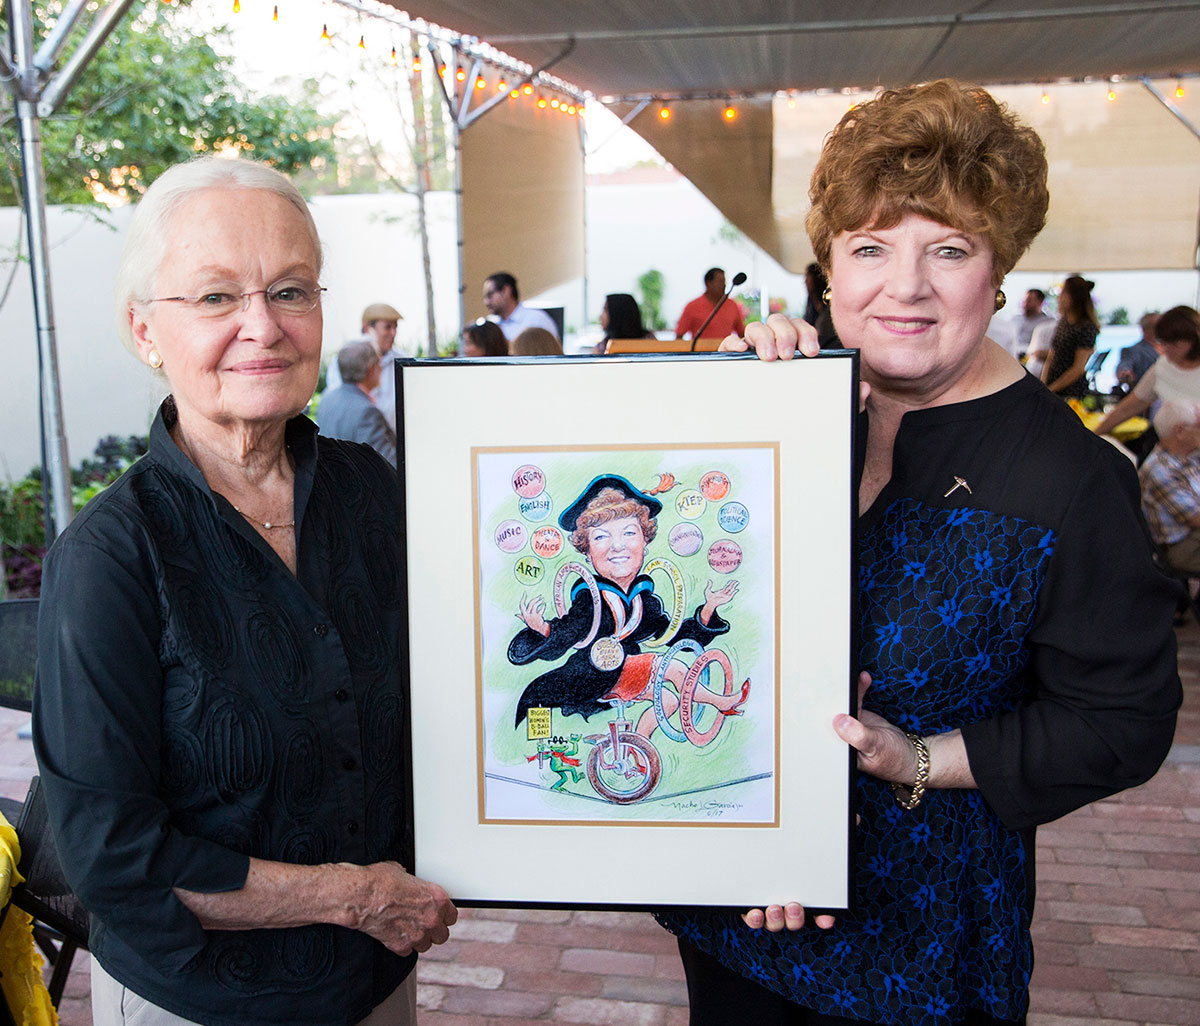 UTEP College of Liberal Arts Dean Patricia Witherspoon, Ph.D., (right) retired in August after 17 years at UTEP. Witherspoon and UTEP President Diana Natalicio (left) hold a caricature of Witherspoon by Nacho L. Garcia. Photo by UTEP News Staff 